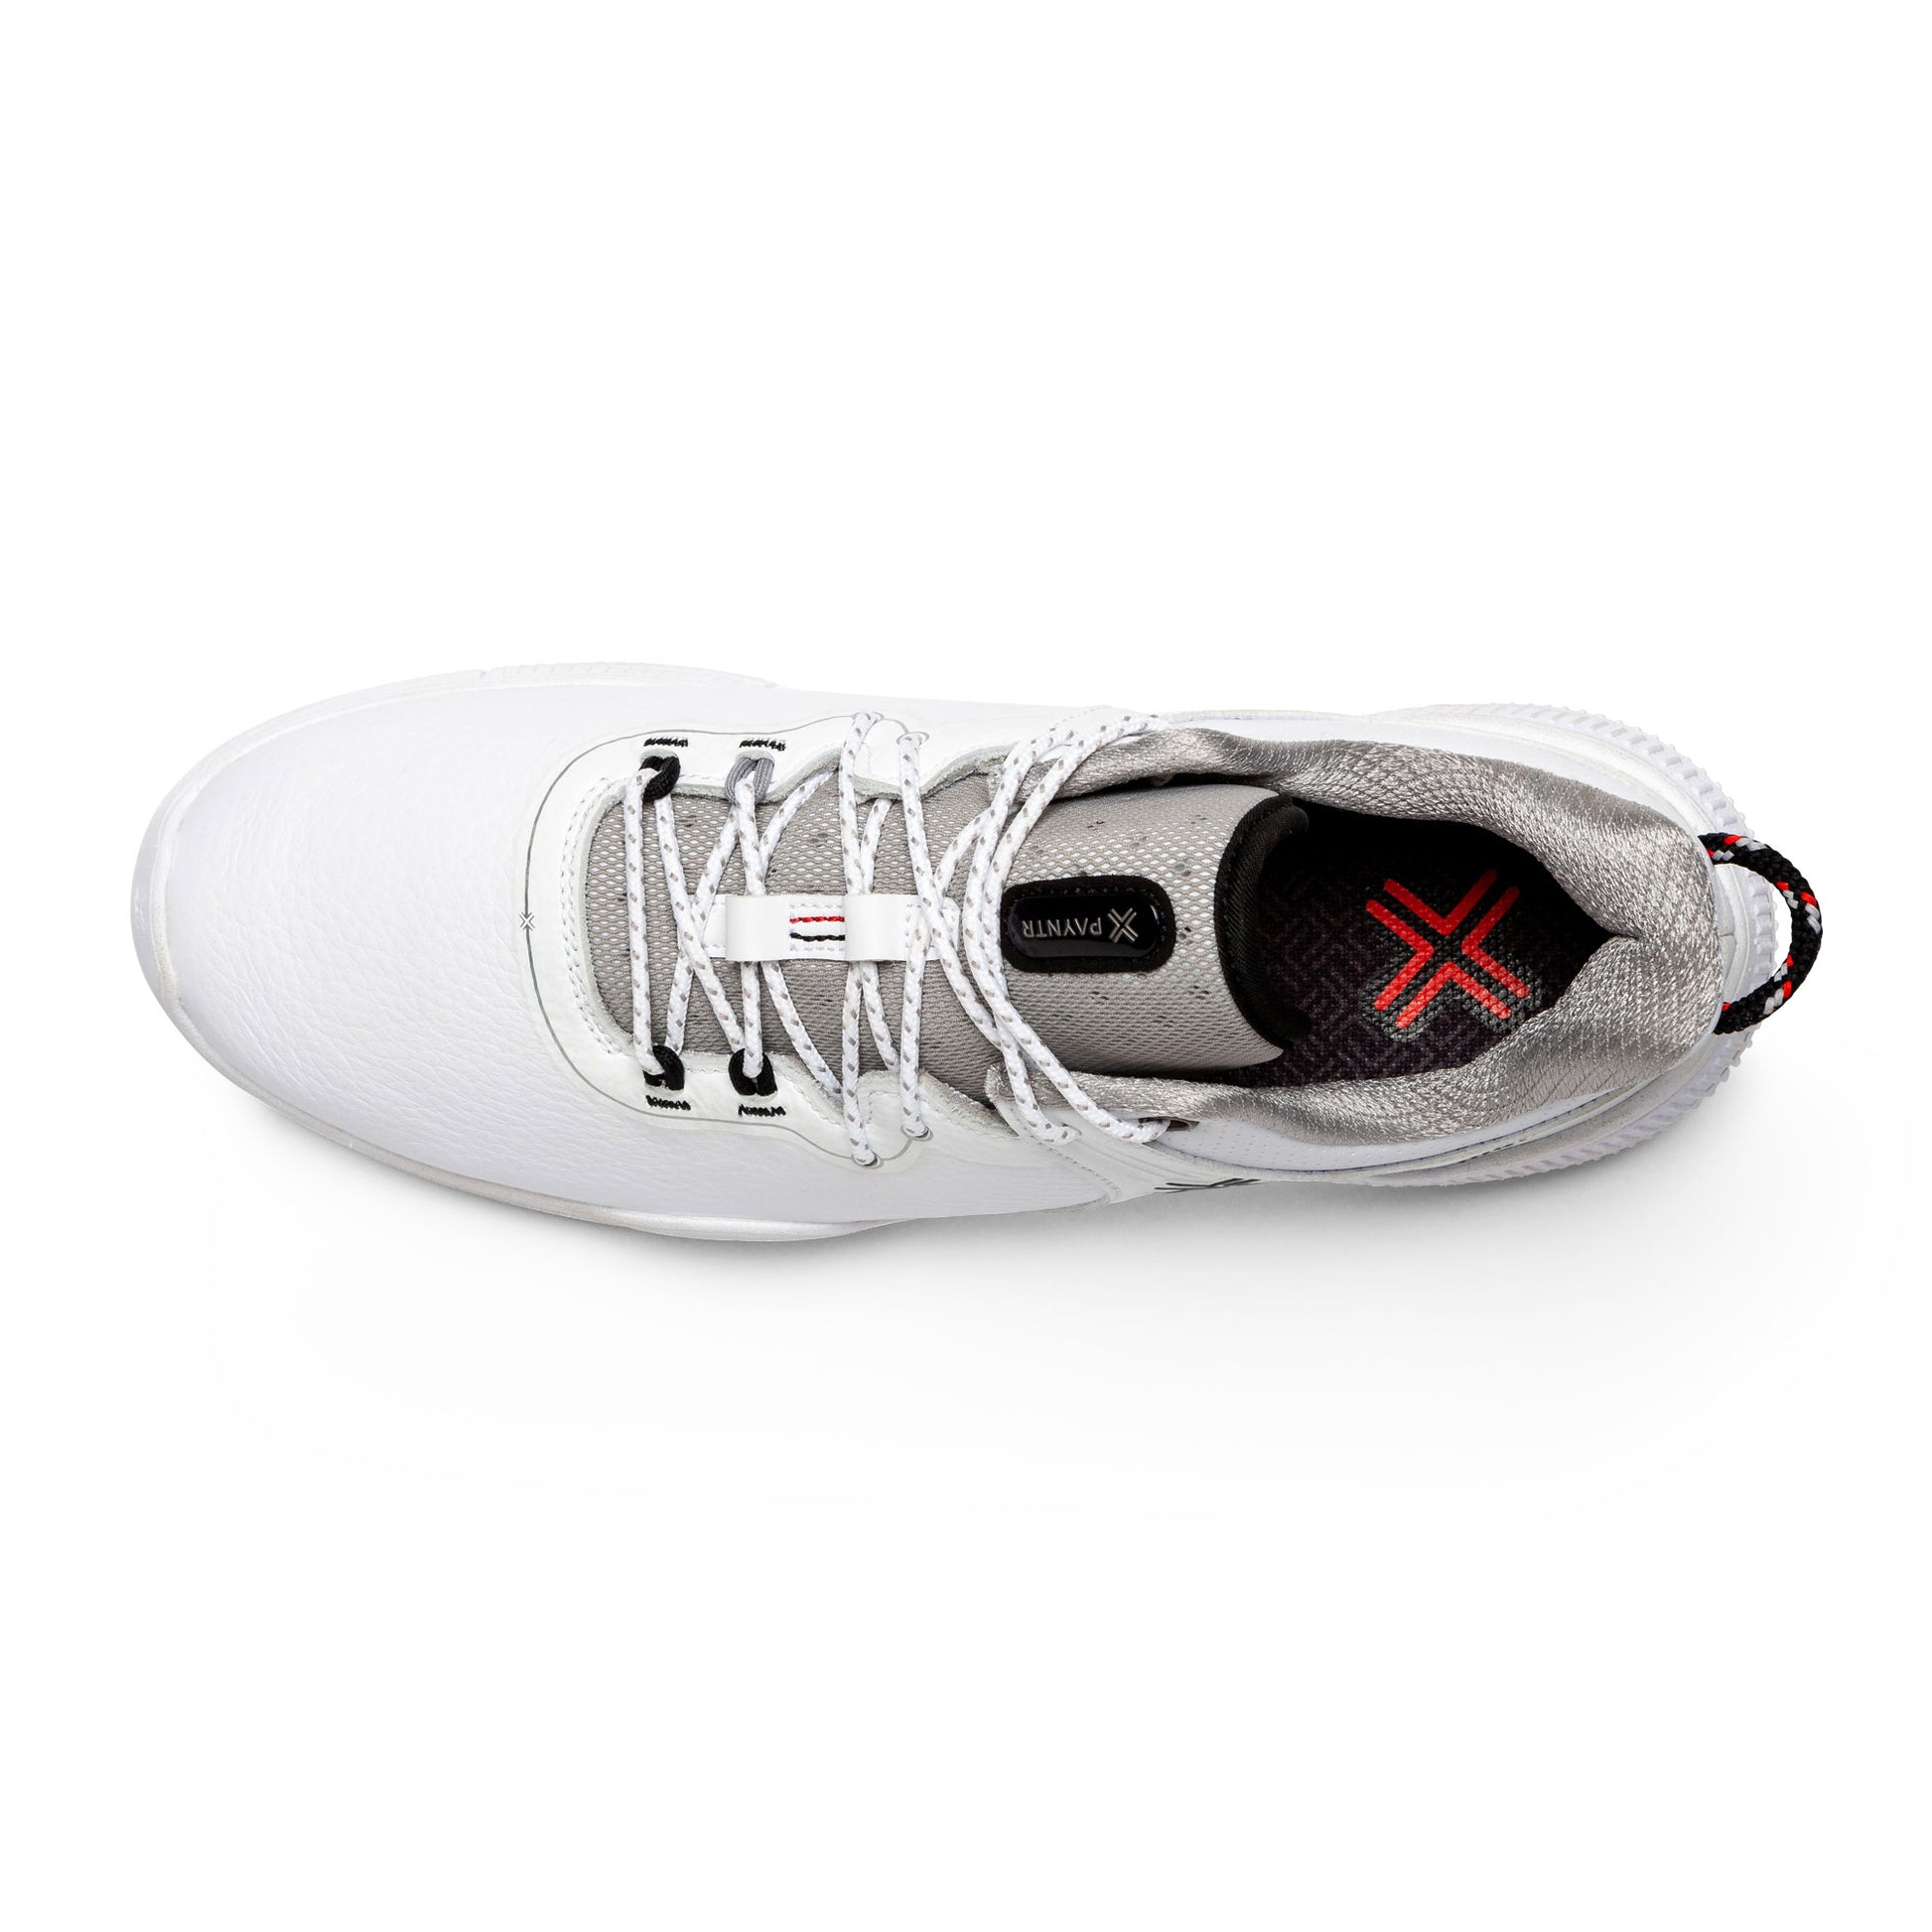 PAYNTR X-002 LE Spikeless Golf Shoe (White) - Top